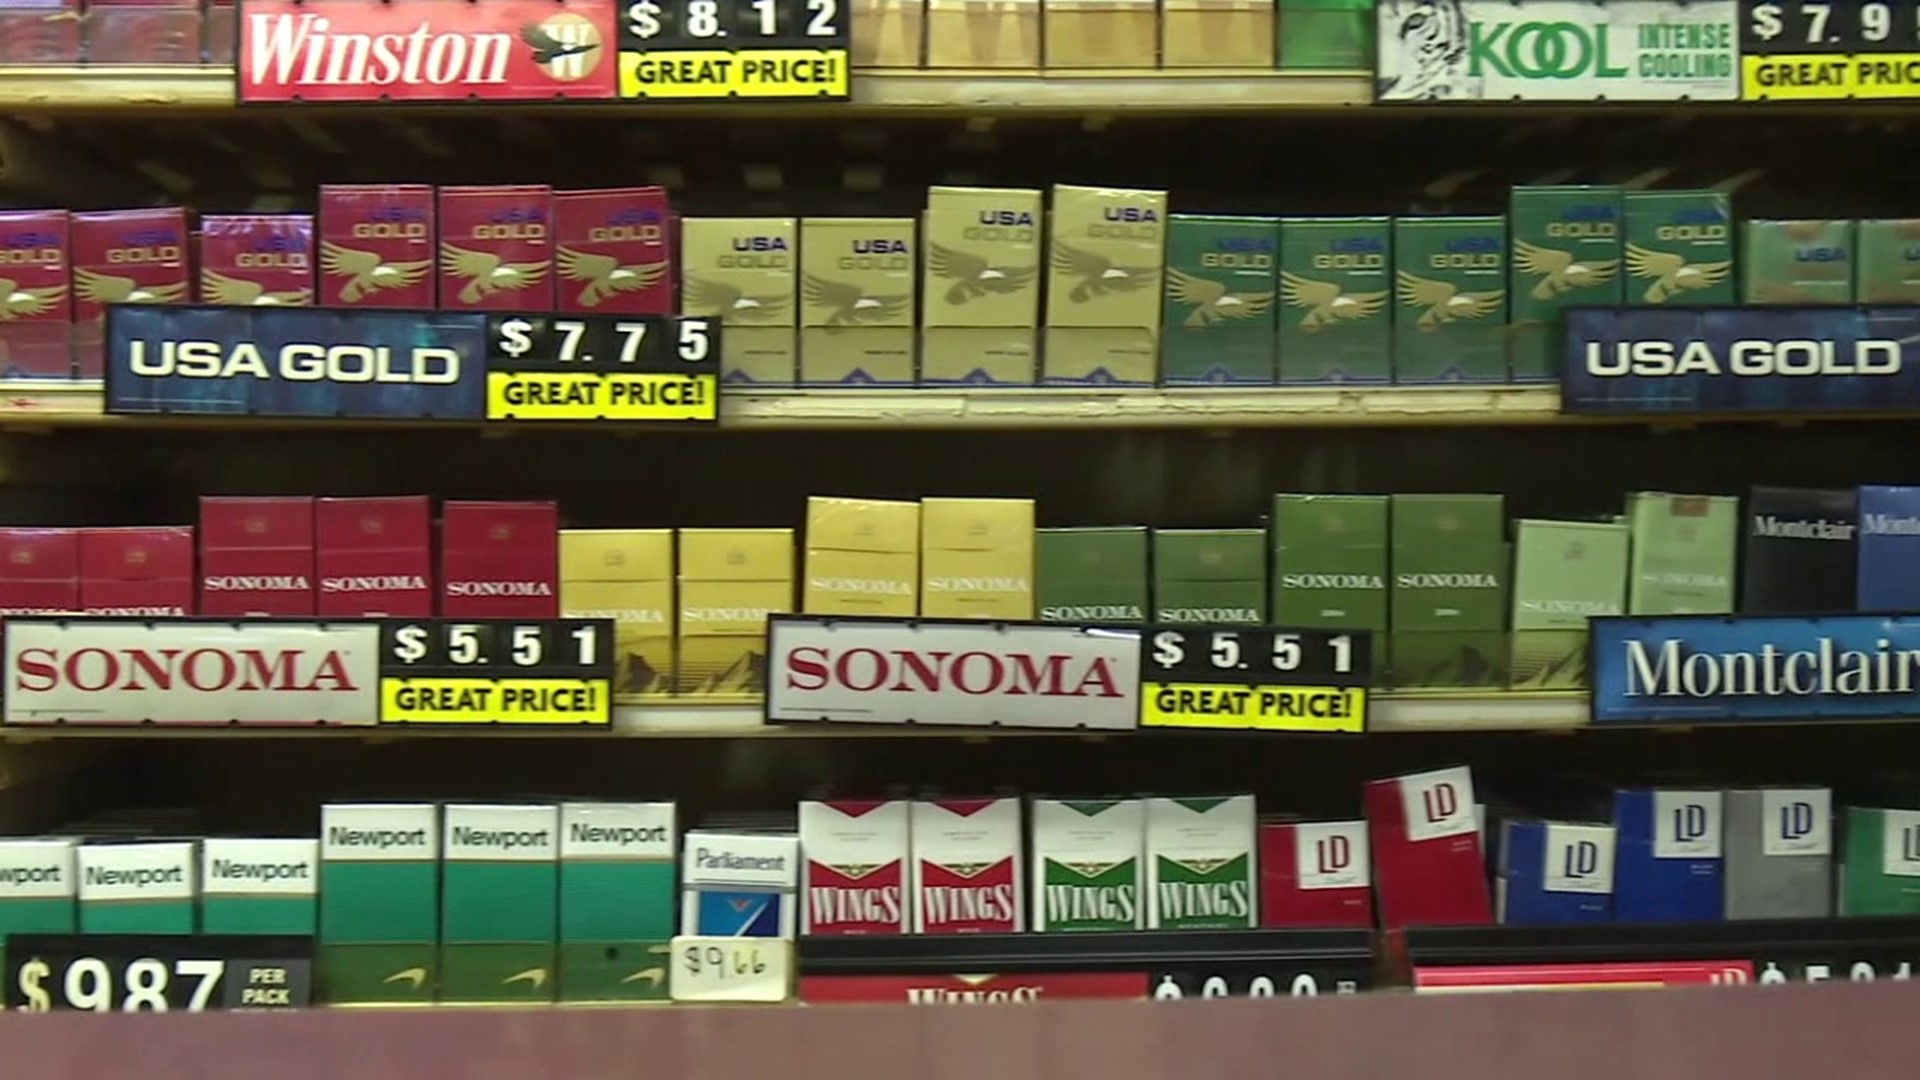 The Food and Drug Administration says getting rid of menthol cigarettes could prevent hundreds of thousands of smoking deaths over the next few decades.